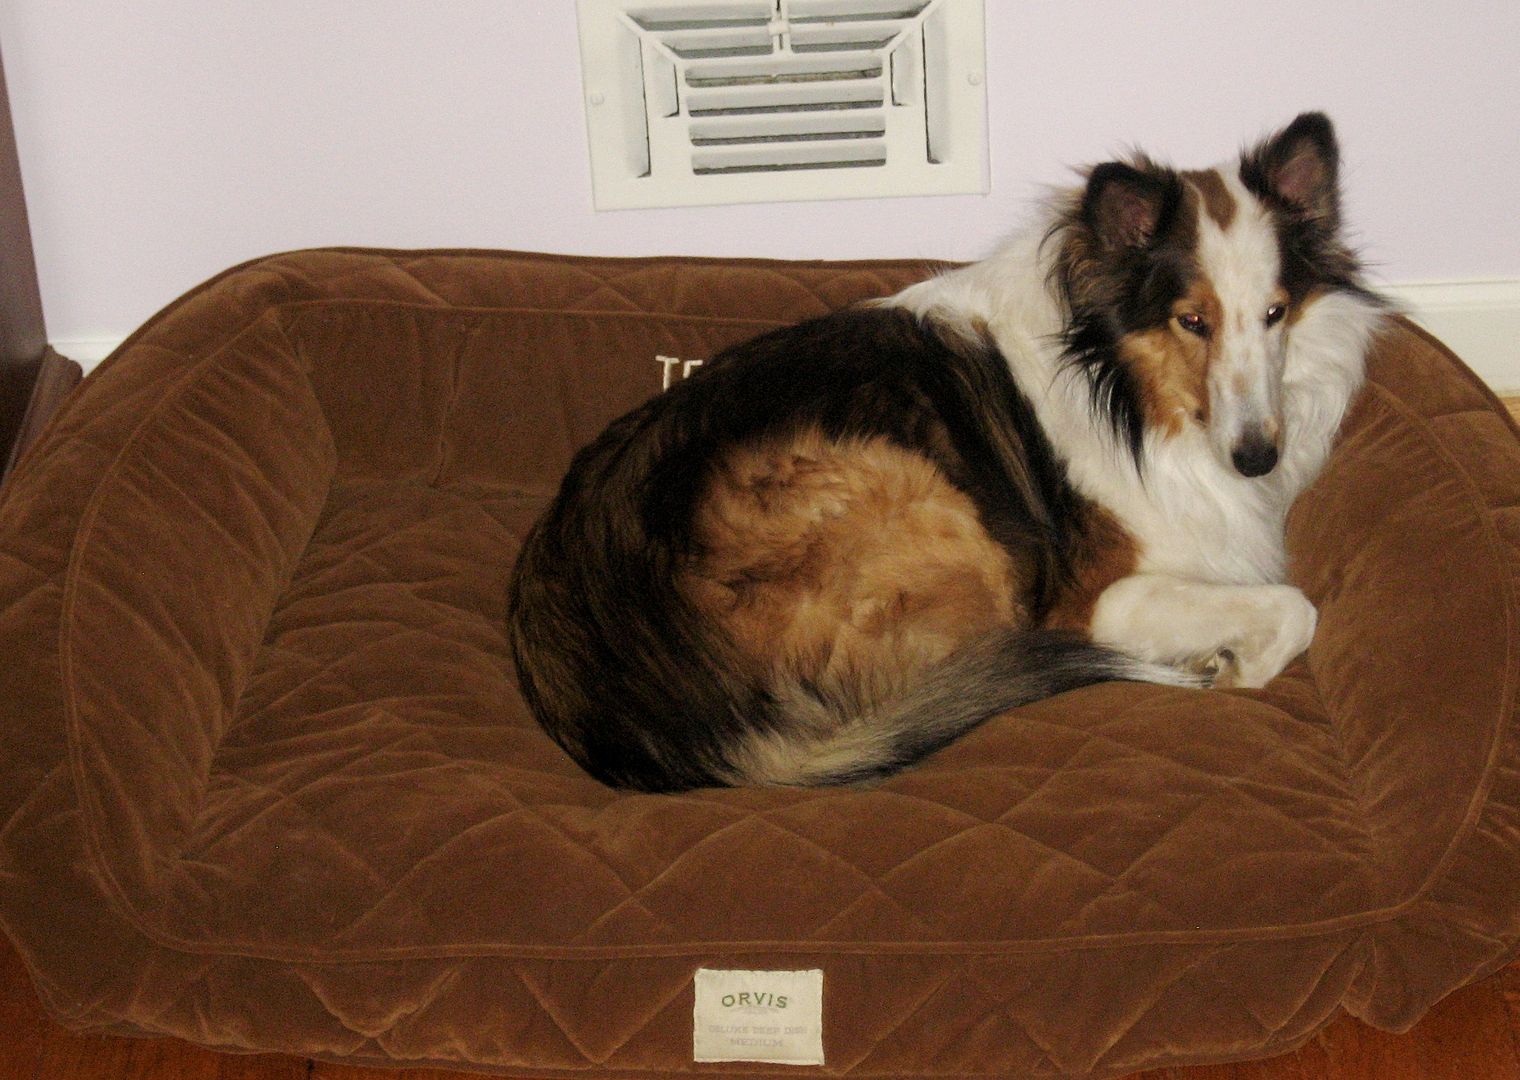 Doesnt *every* dog have a monogrammed bed from Orvis? :)